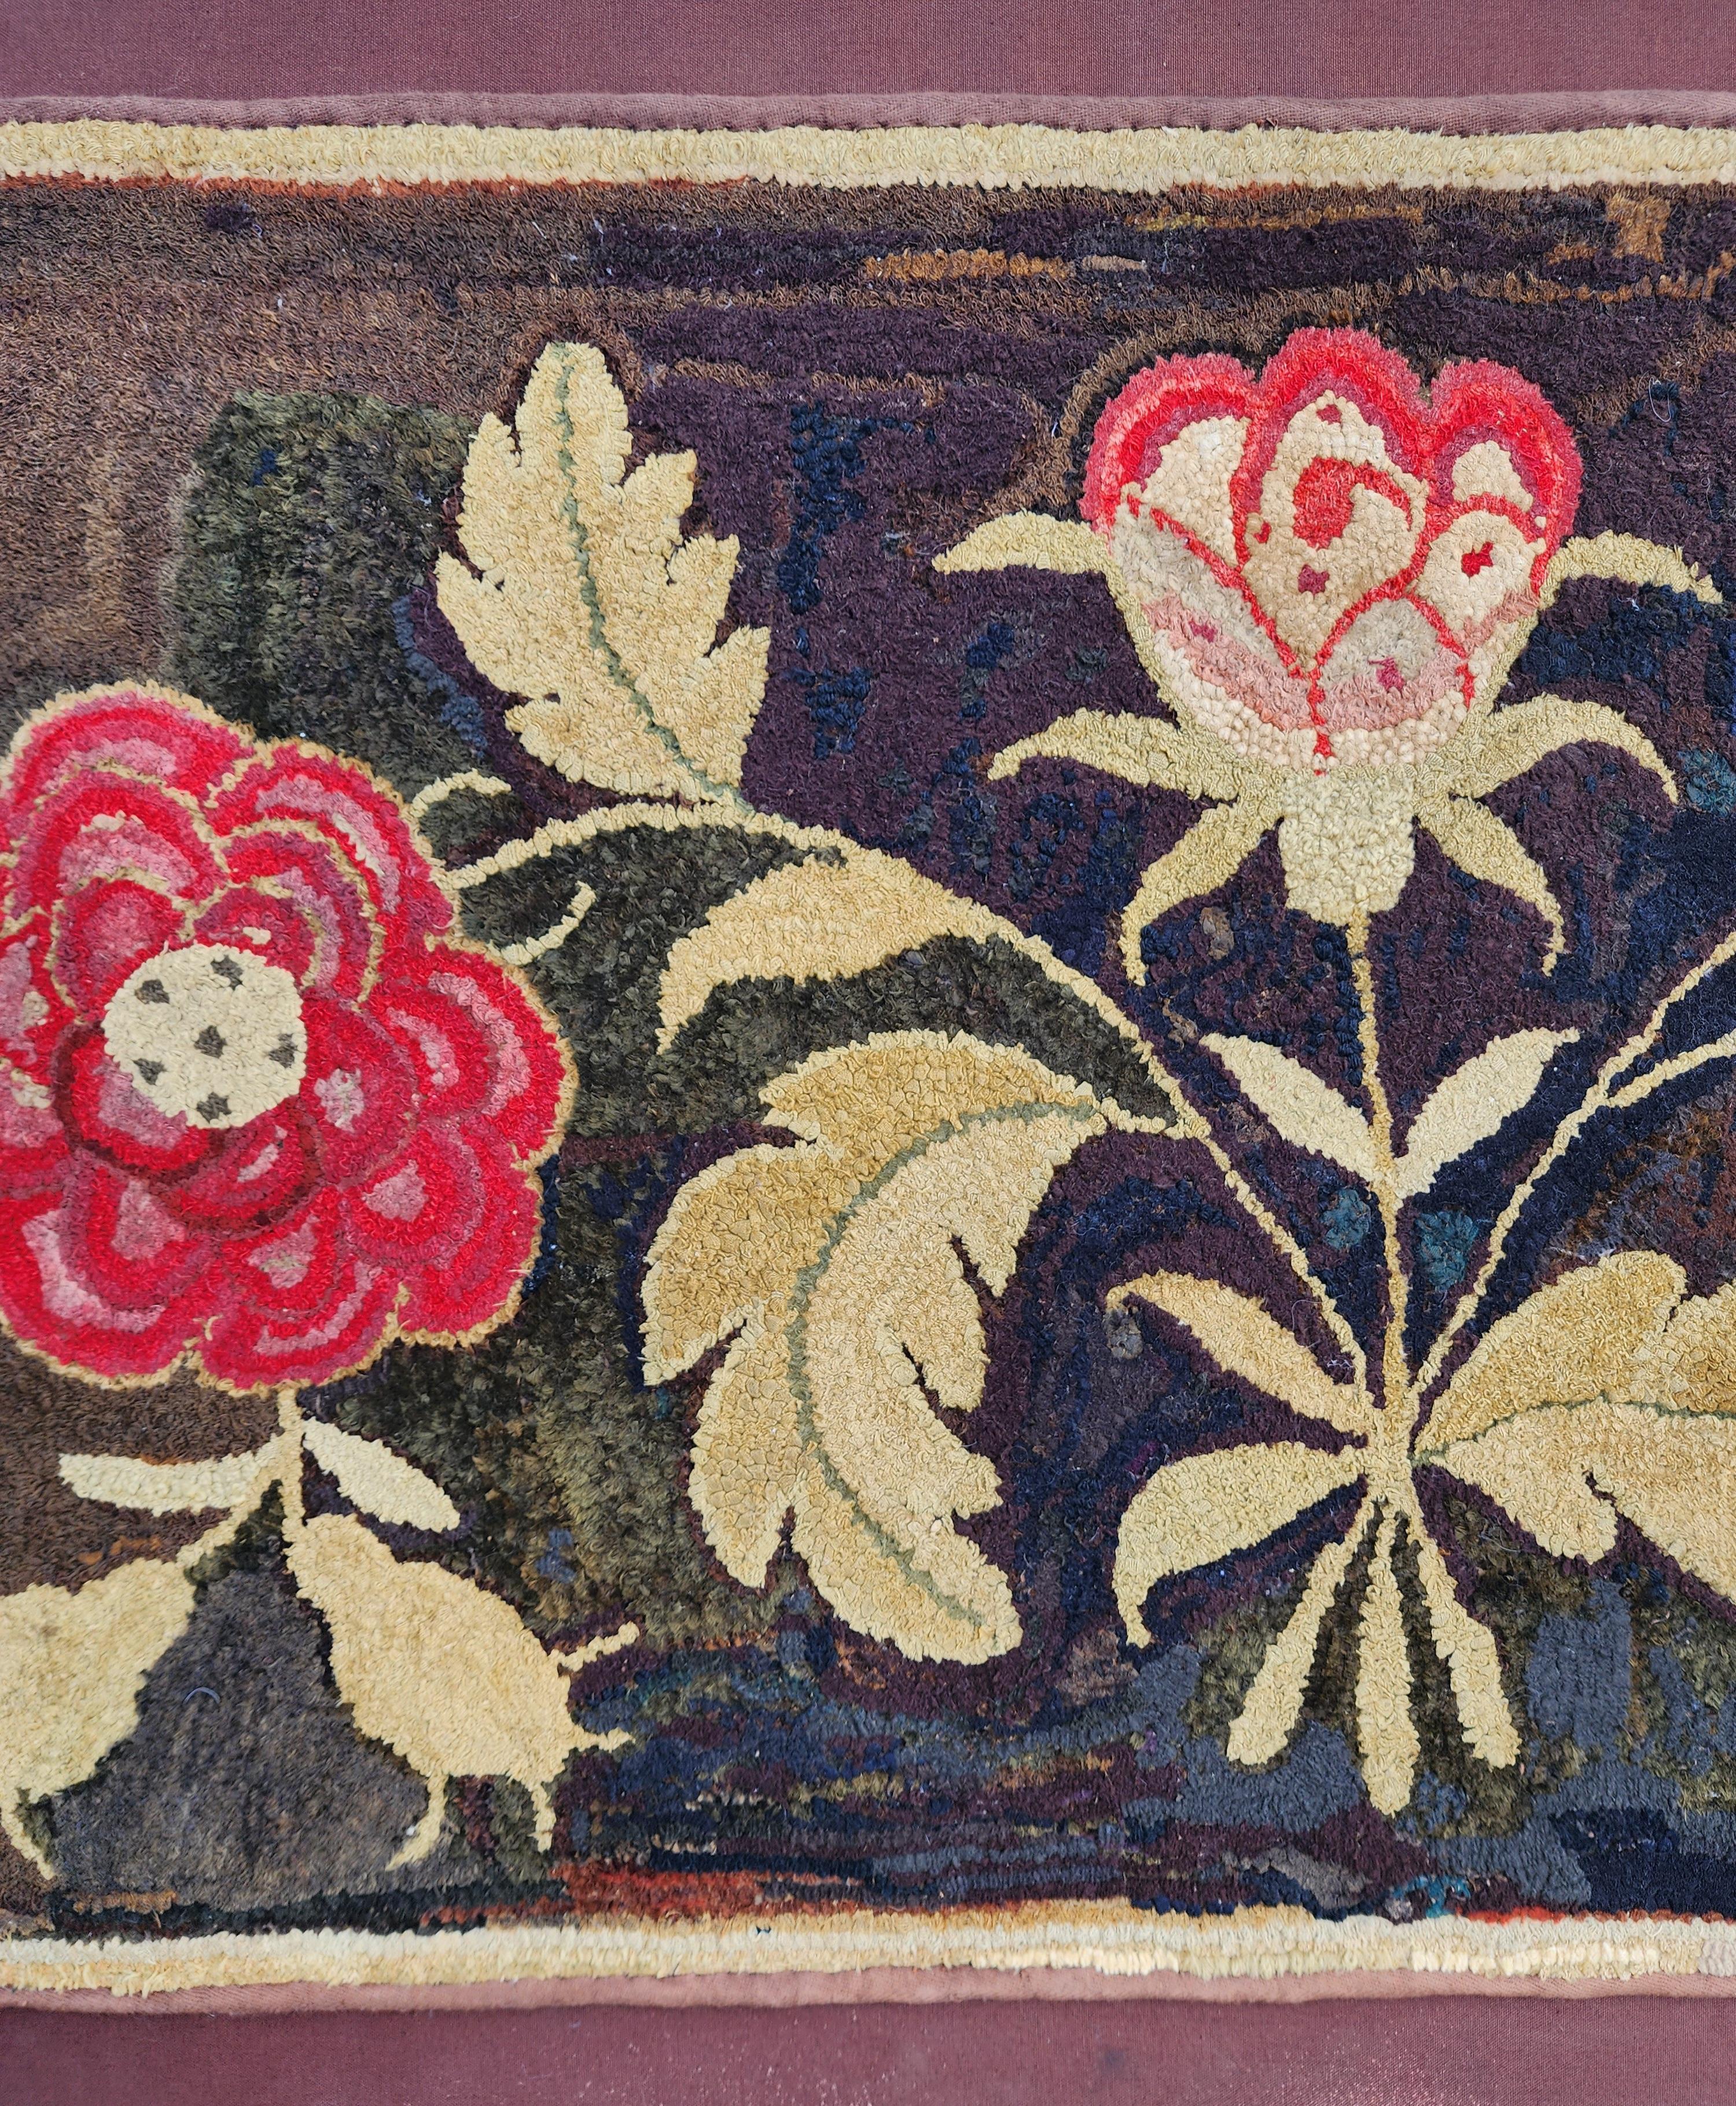 Folk art hand shirred and hooked rug in wonderful colors on a black mottled background. Wool on linen, American, New England circa 1830's. The colors of the flowers are perfectly beautiful against the mottled almost Mondrian like black background.